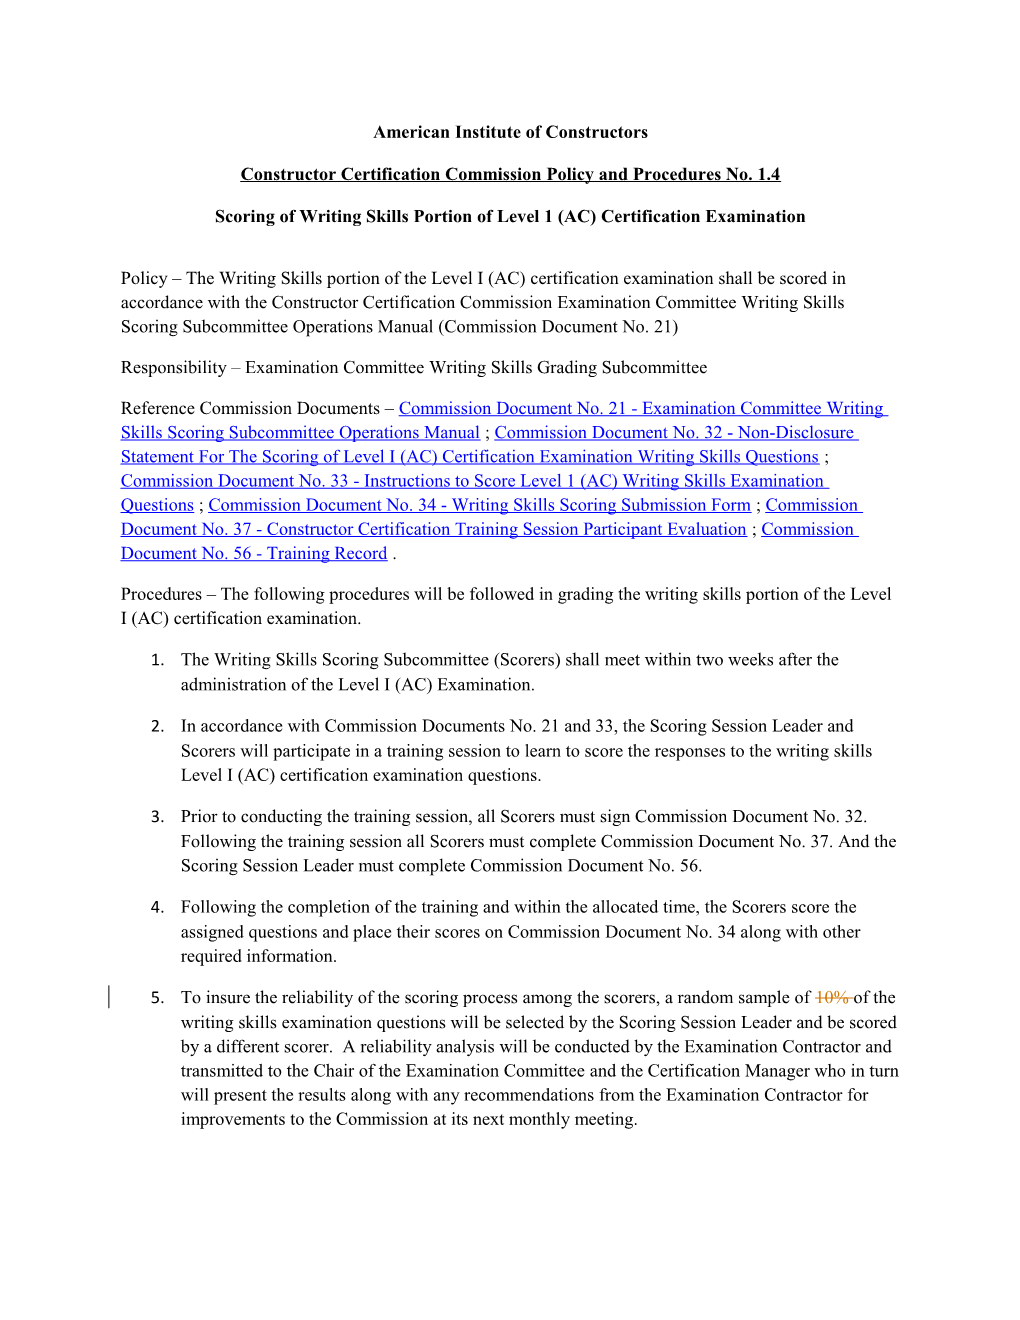 Constructor Certification Commission Policy and Procedures No. 1.4